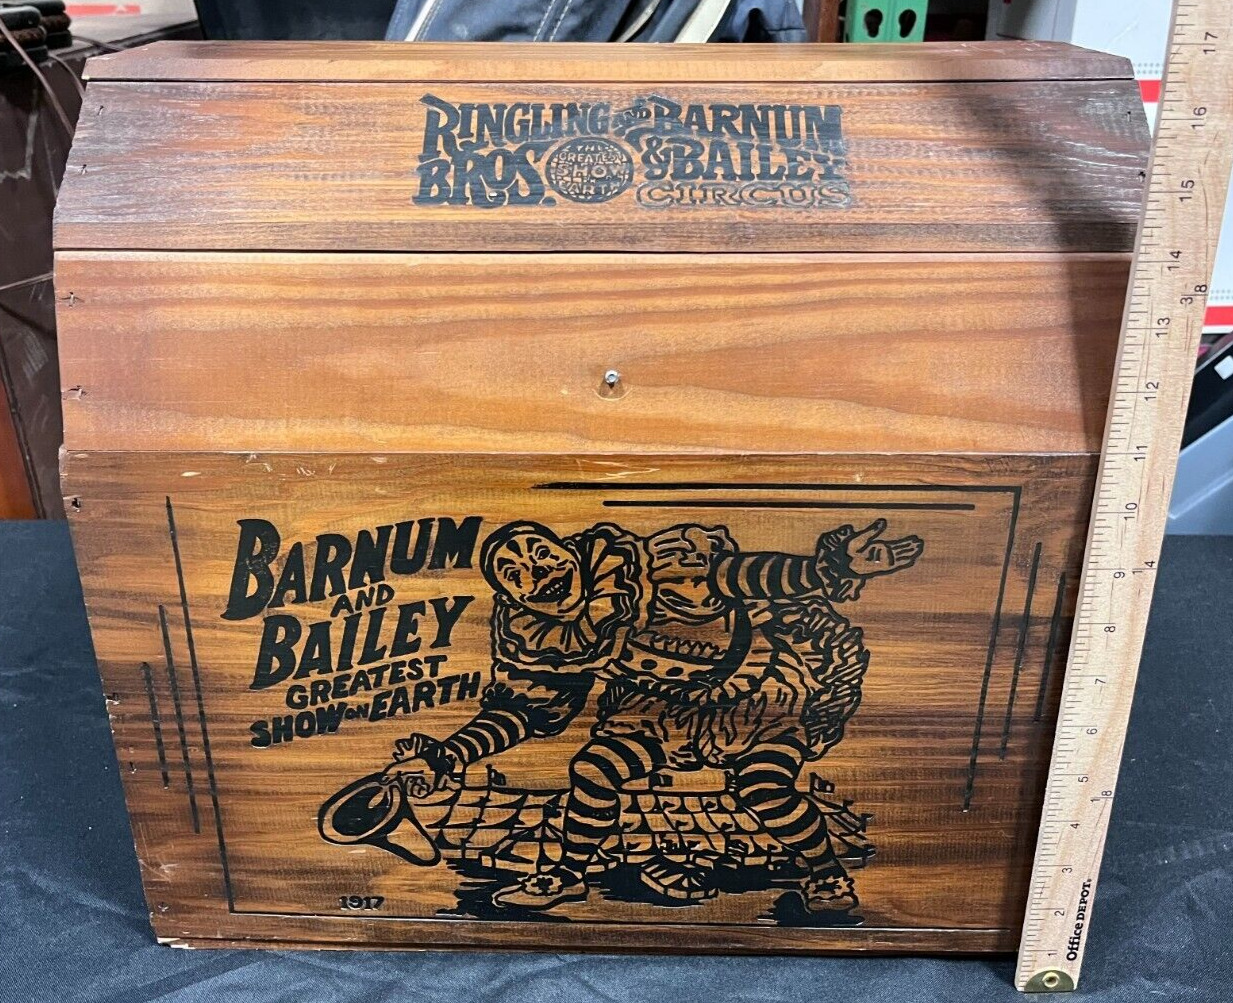 1981 Ringling Bros and Barnum & Bailey Circus Wooden Toy Chest AA D